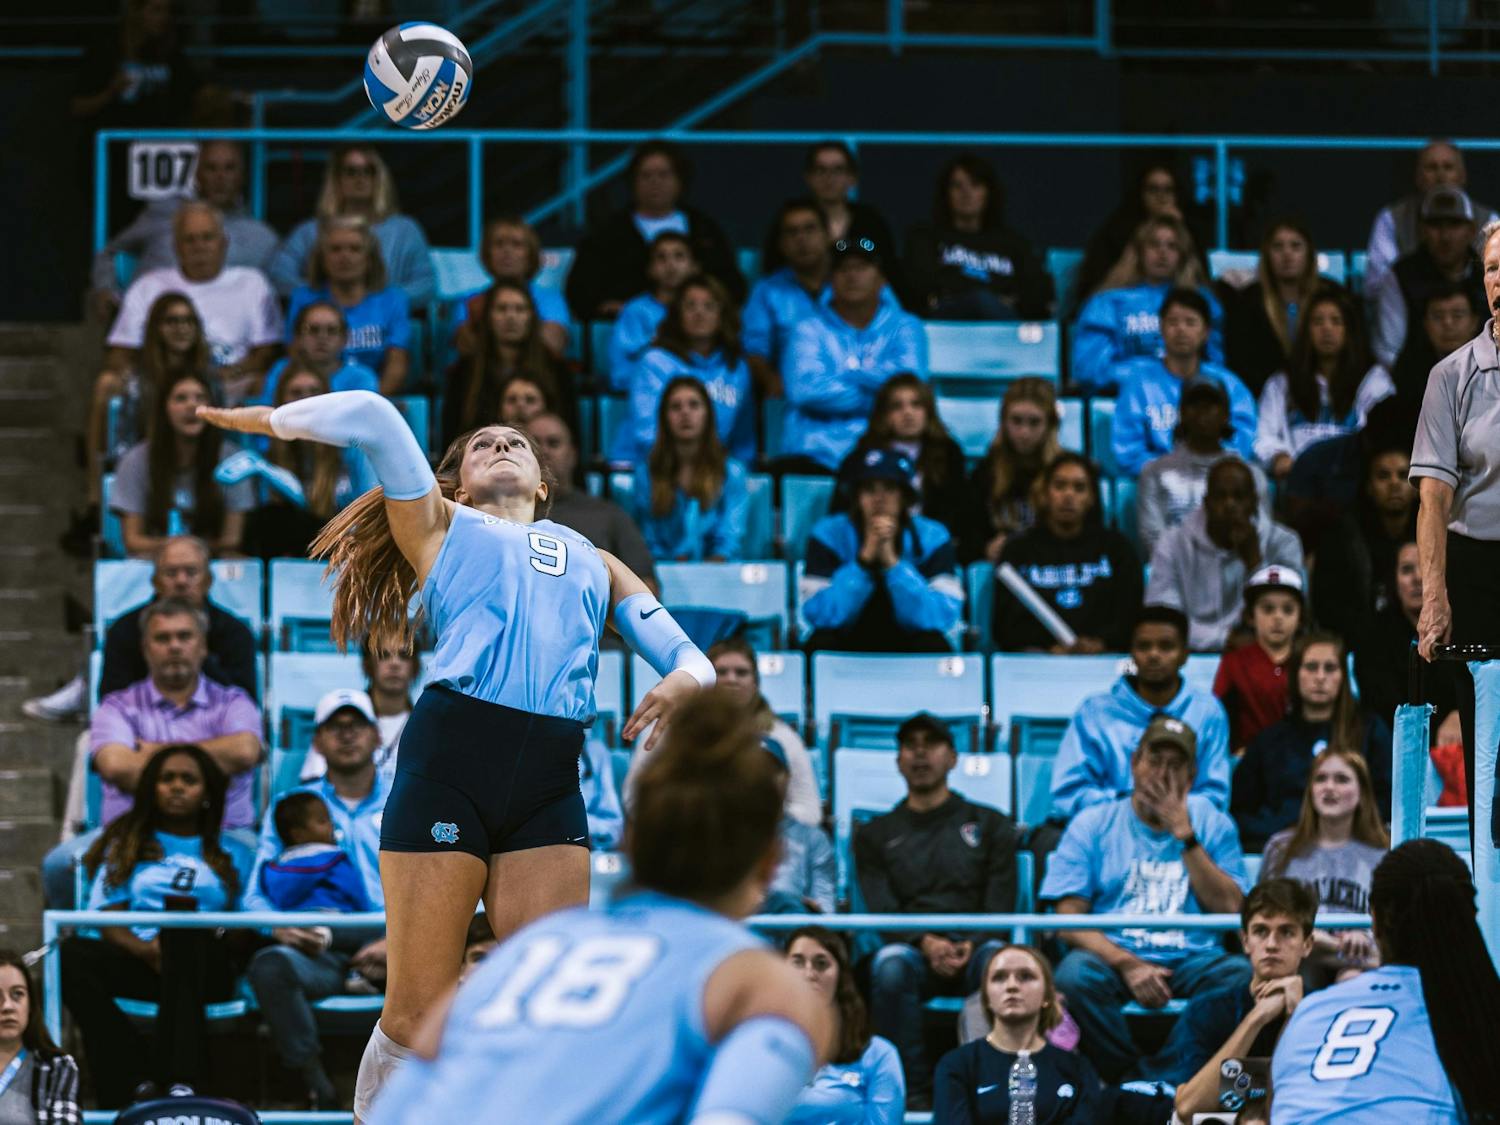 UNC sophomore Mabrey Shaffmaster (9) rises up in the third set of the volleyball match against Louisville on Sunday, Nov. 13, 2022. UNC fell 3-0 to Louisville.